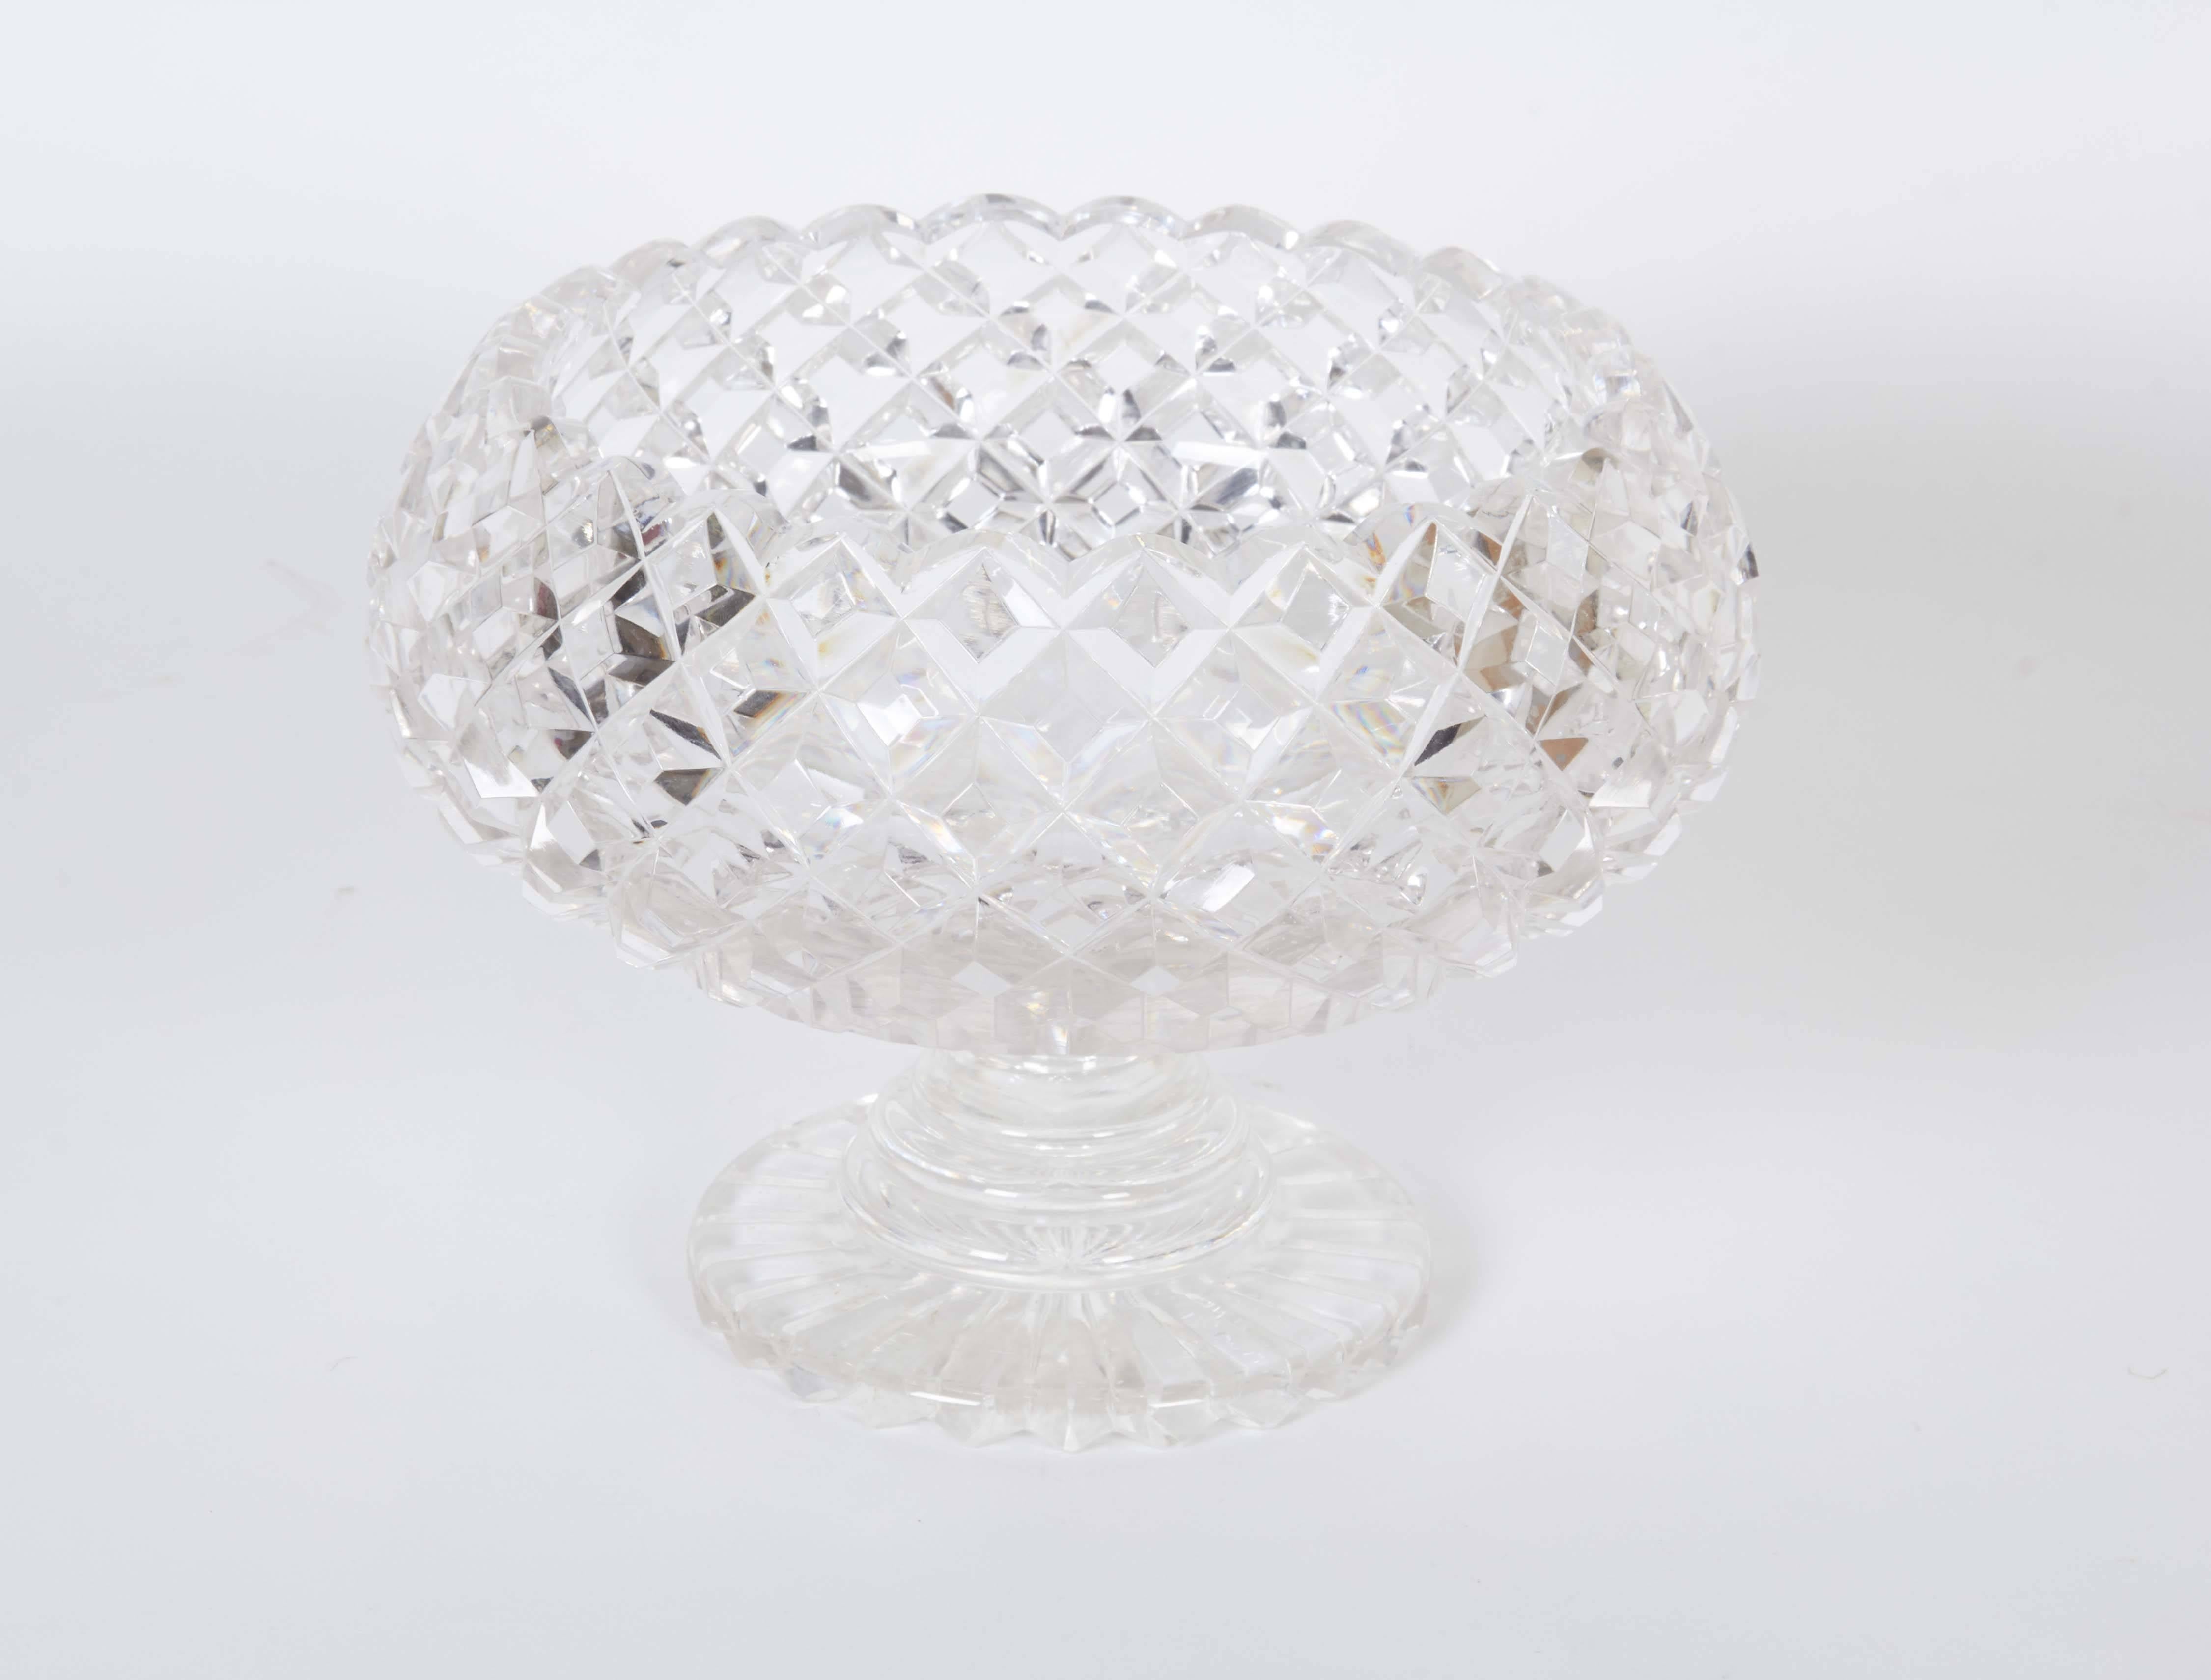 A pair of cut crystal compotes (or footed bowls), with scalloped edge and beveled diamond cut crosshatch patterns, each raised on single round stepped base. Very good condition, minuscule wear to bases consistent with age and use.

10938